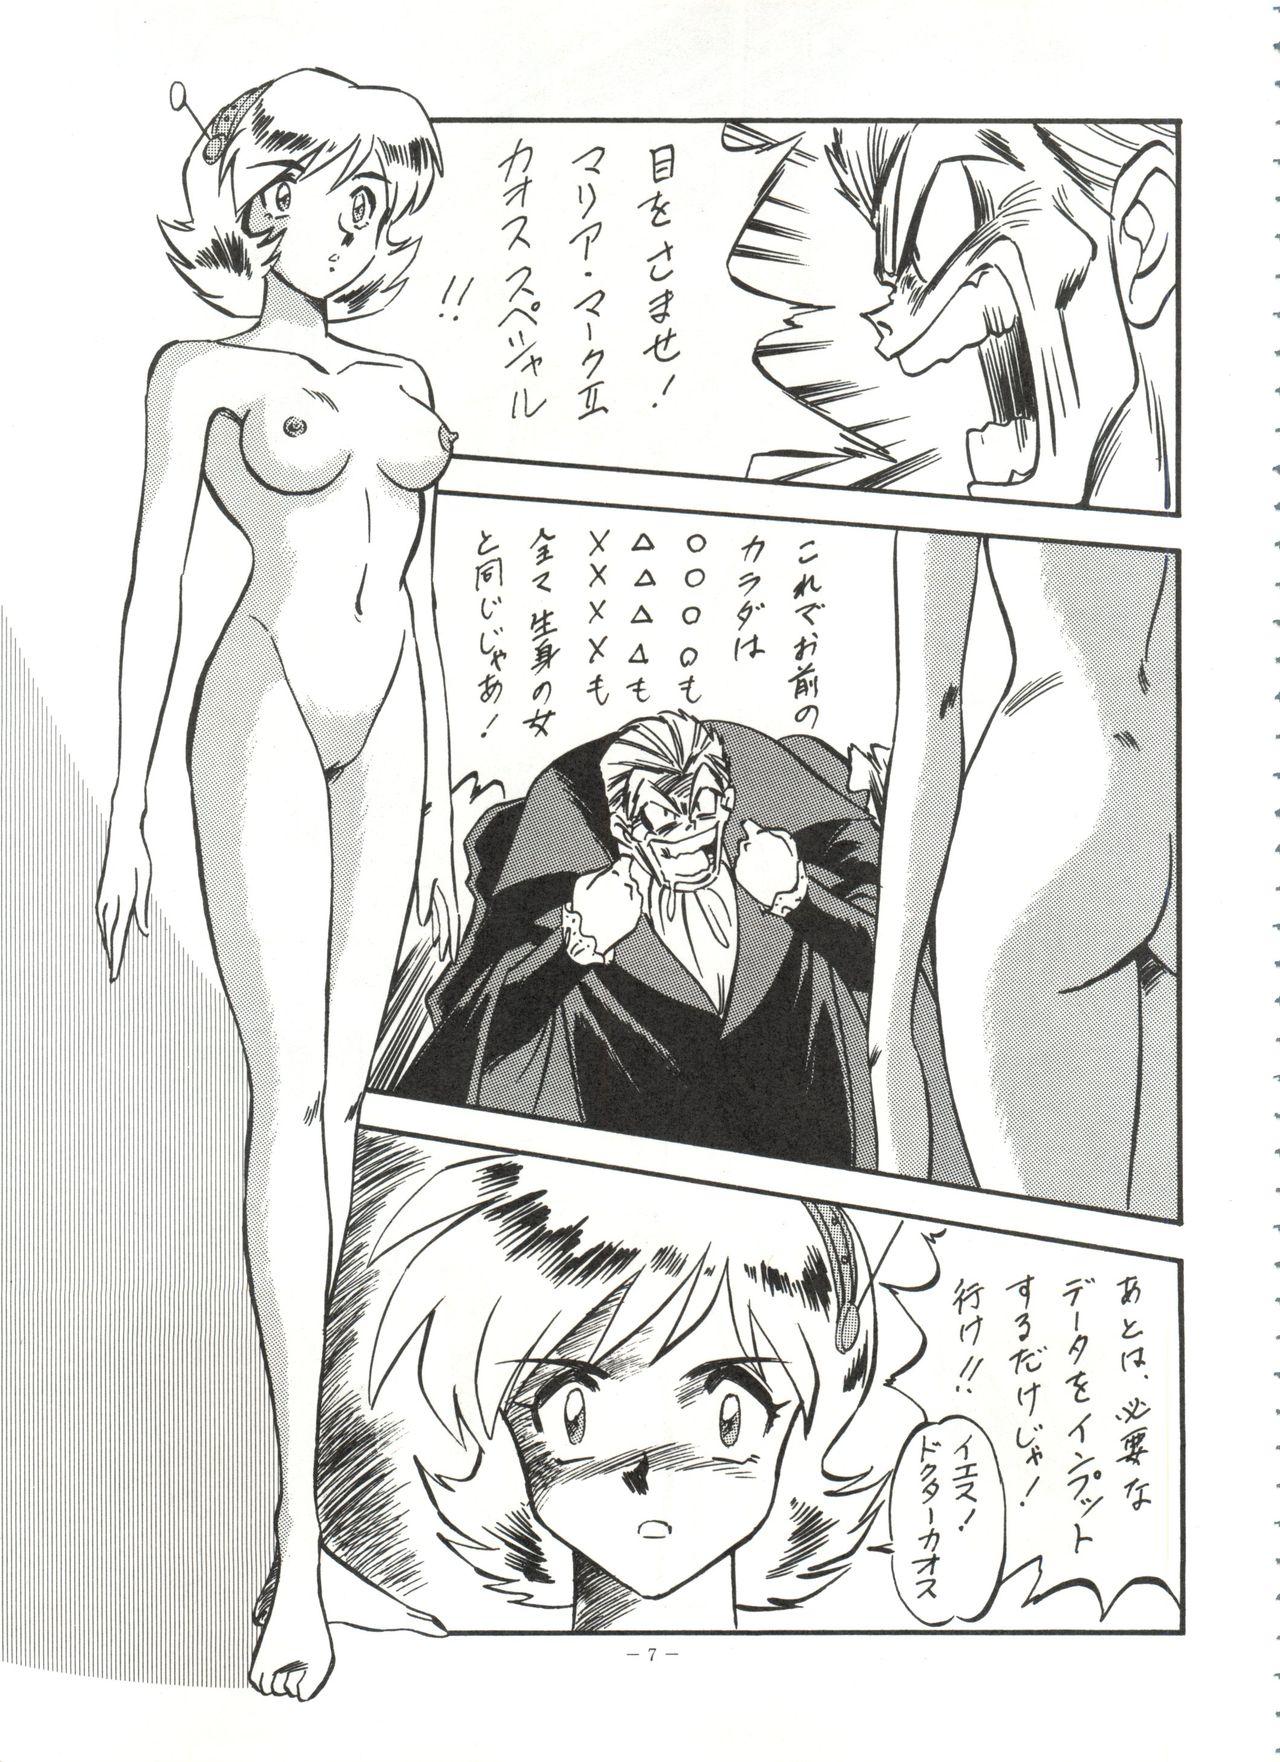 Gay Uncut LOOK OUT 31 - Sailor moon Ghost sweeper mikami Lord of lords ryu knight Patlabor Brave police j-decker Ass Worship - Page 6